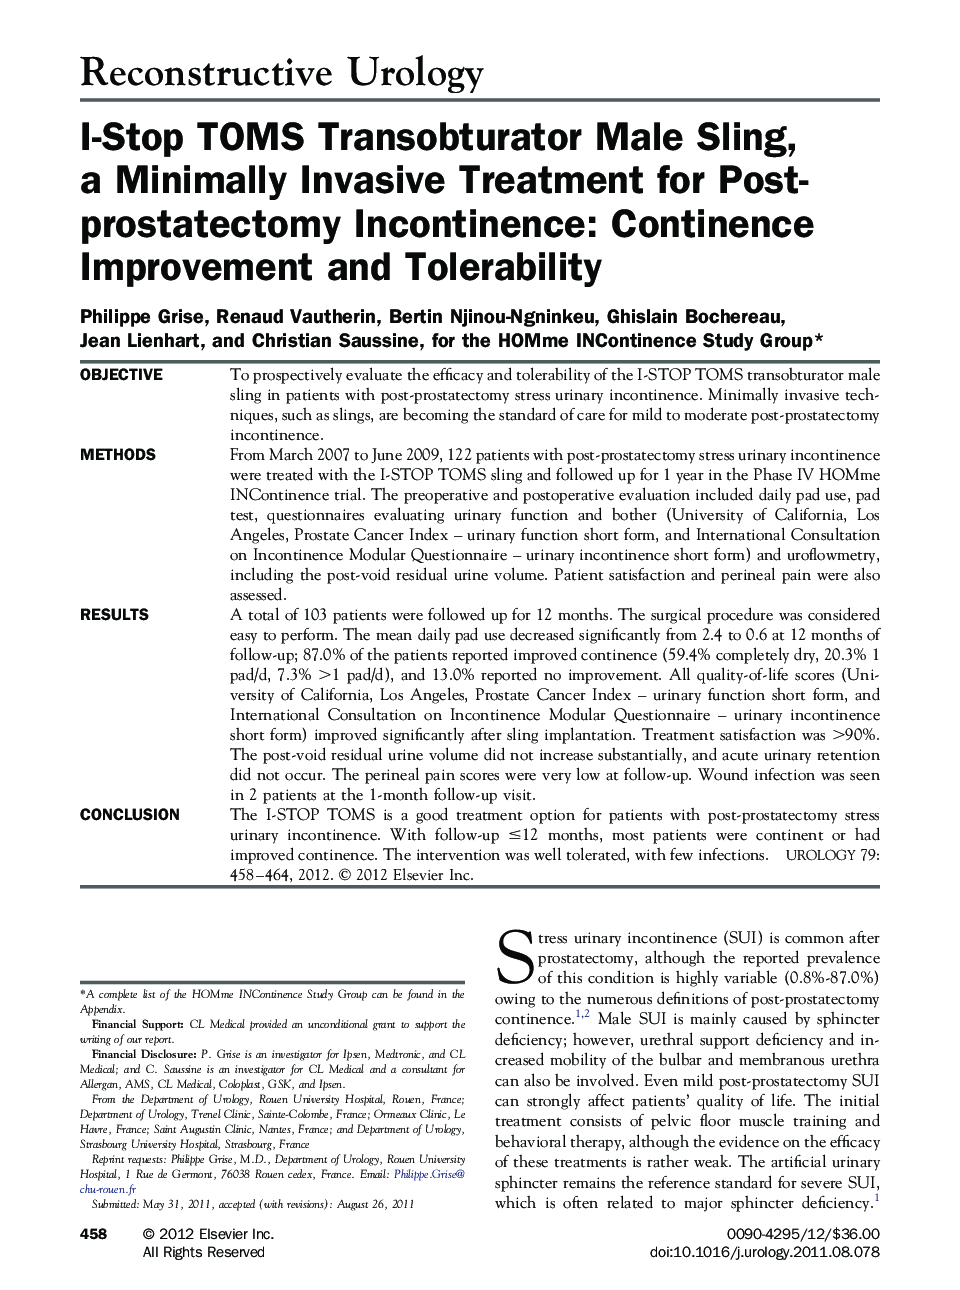 I-Stop TOMS Transobturator Male Sling, a Minimally Invasive Treatment for Post-prostatectomy Incontinence: Continence Improvement and Tolerability 